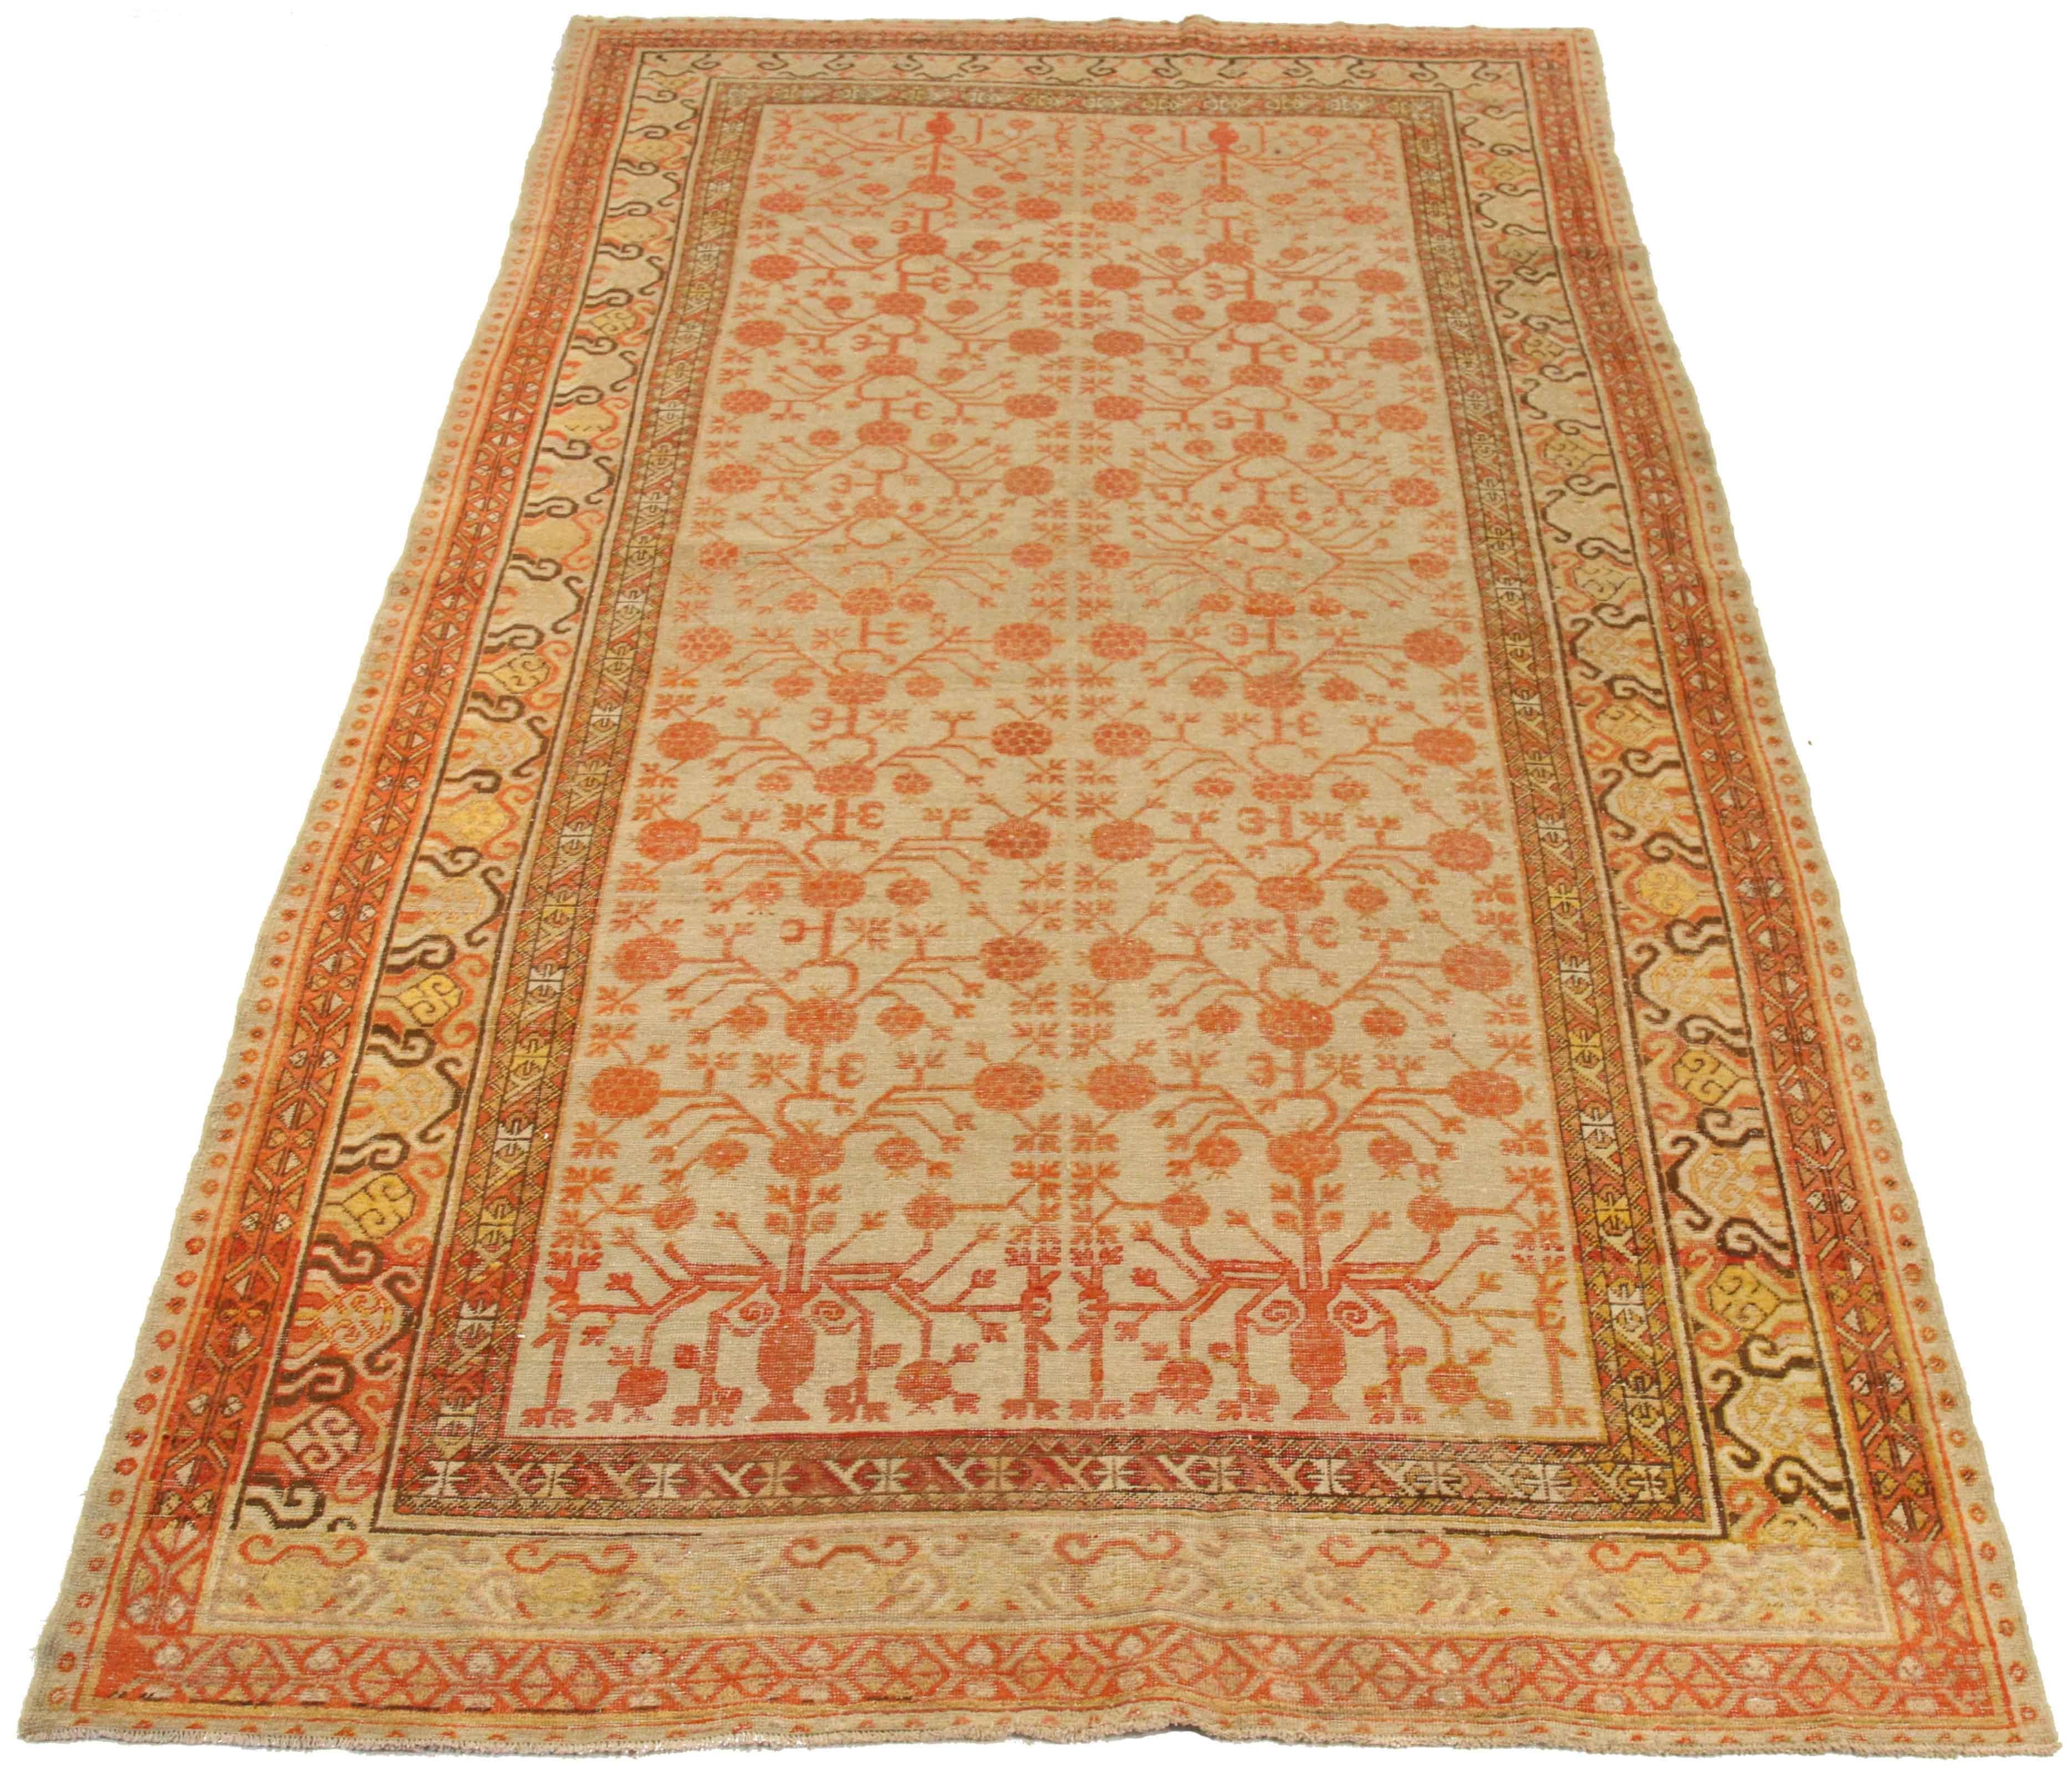 Hand-Knotted 1920s Antique Central Asian Rug Khotan Design with Beige and Orange Motifq For Sale